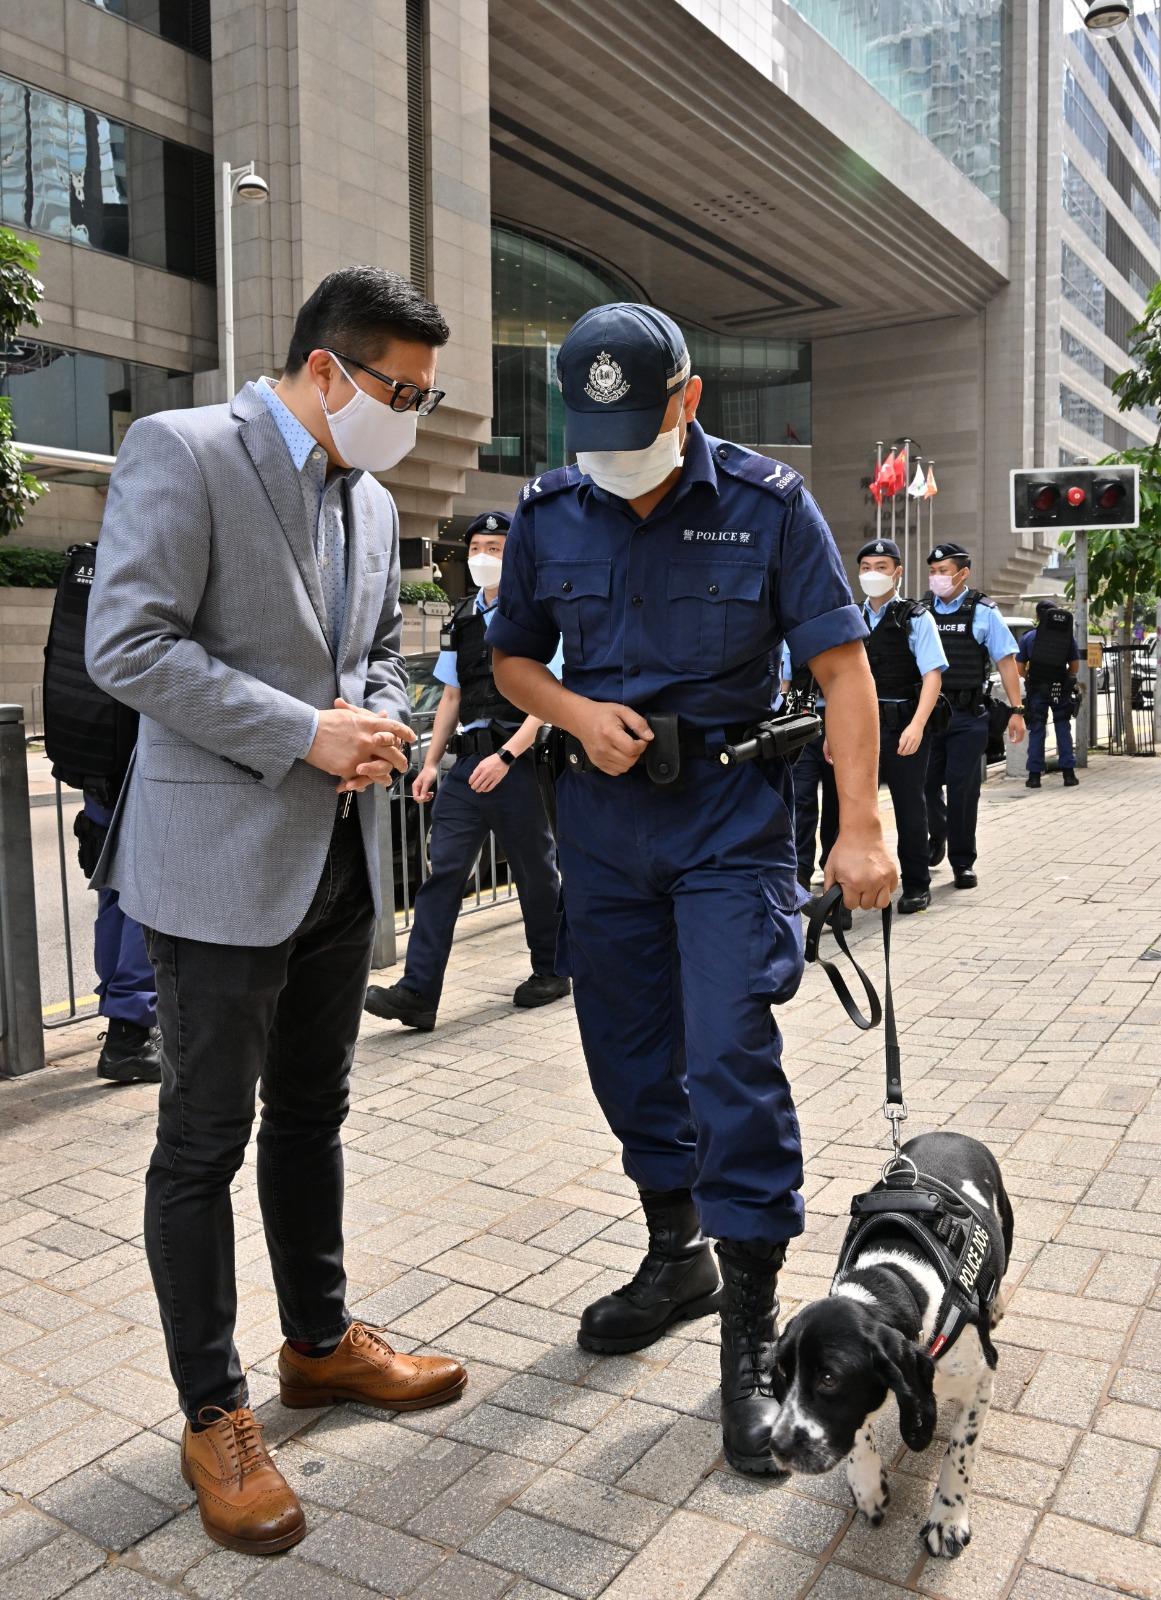 The Secretary for Security, Mr Tang Ping-keung, this morning (May 8) inspected the security arrangements in the vicinity of the Hong Kong Convention and Exhibition Centre to ensure the 2022 Chief Executive Election be conducted in a safe and orderly manner. Photo shows Mr Tang (left) giving the personnel of the Police Dog Unit on duty nearby words of encouragement.